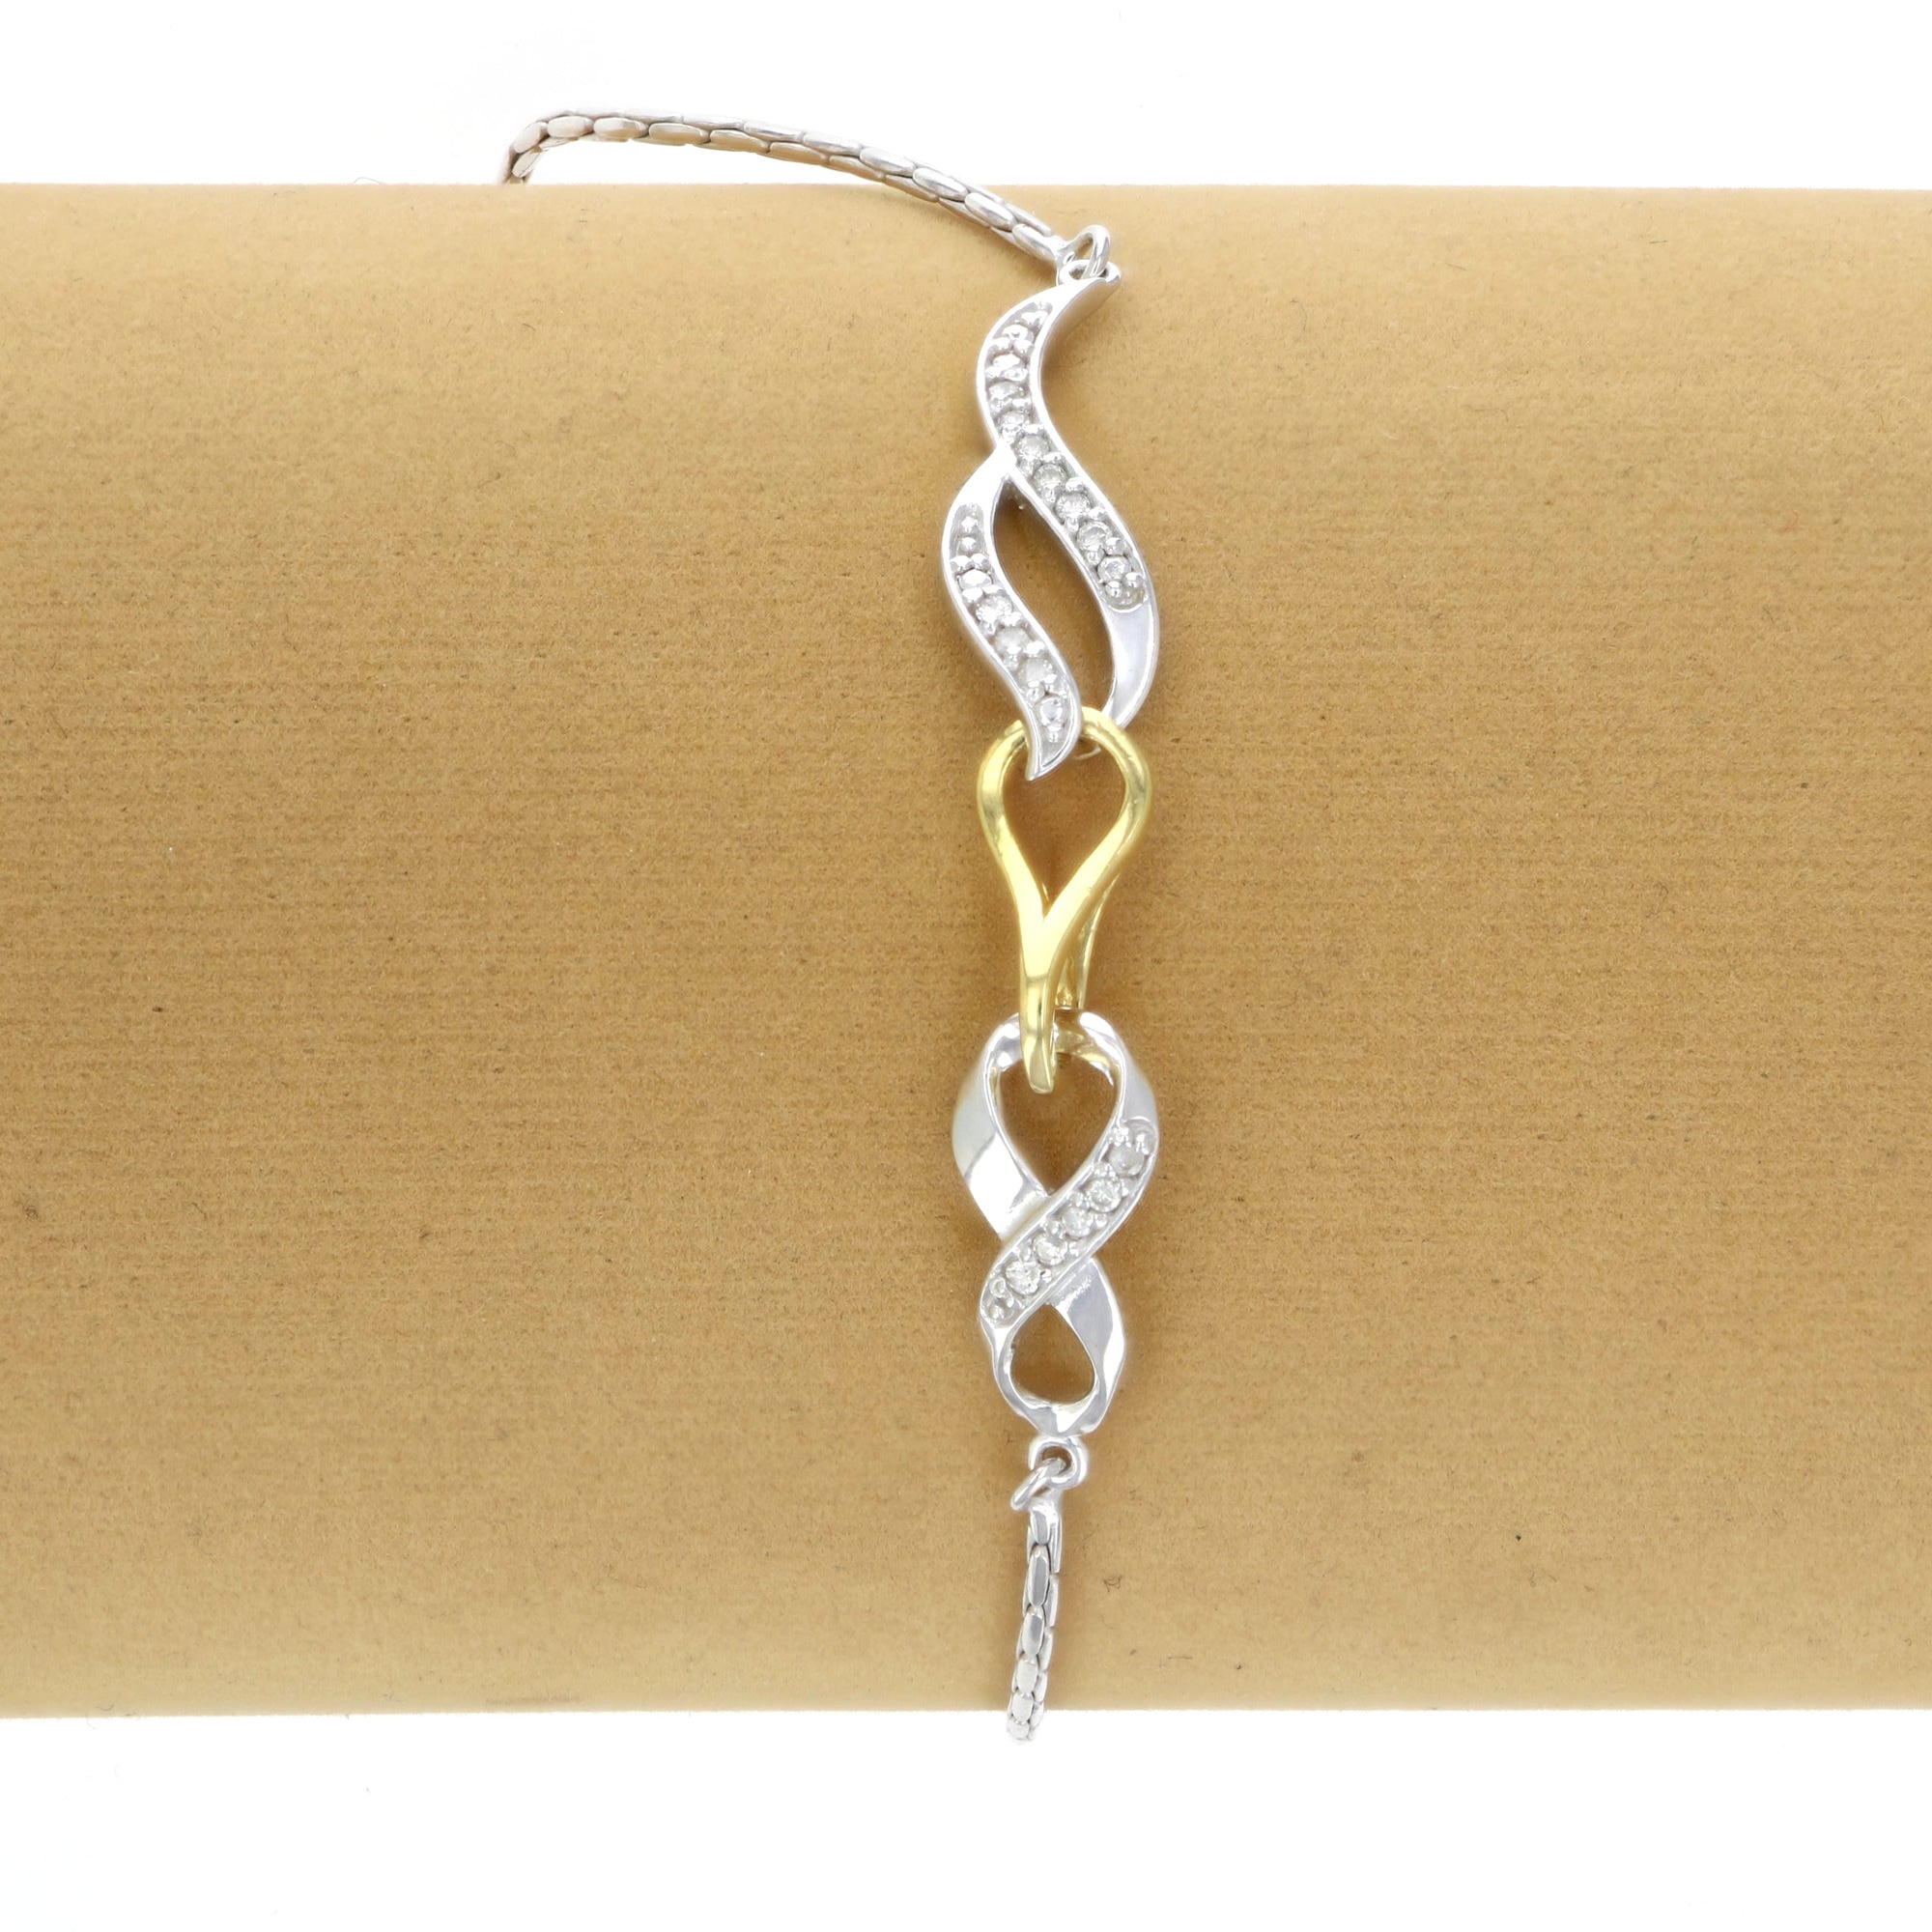 1/10 cttw Diamond Bolo Bracelet Yellow Gold Plated over Silver Infinity Style